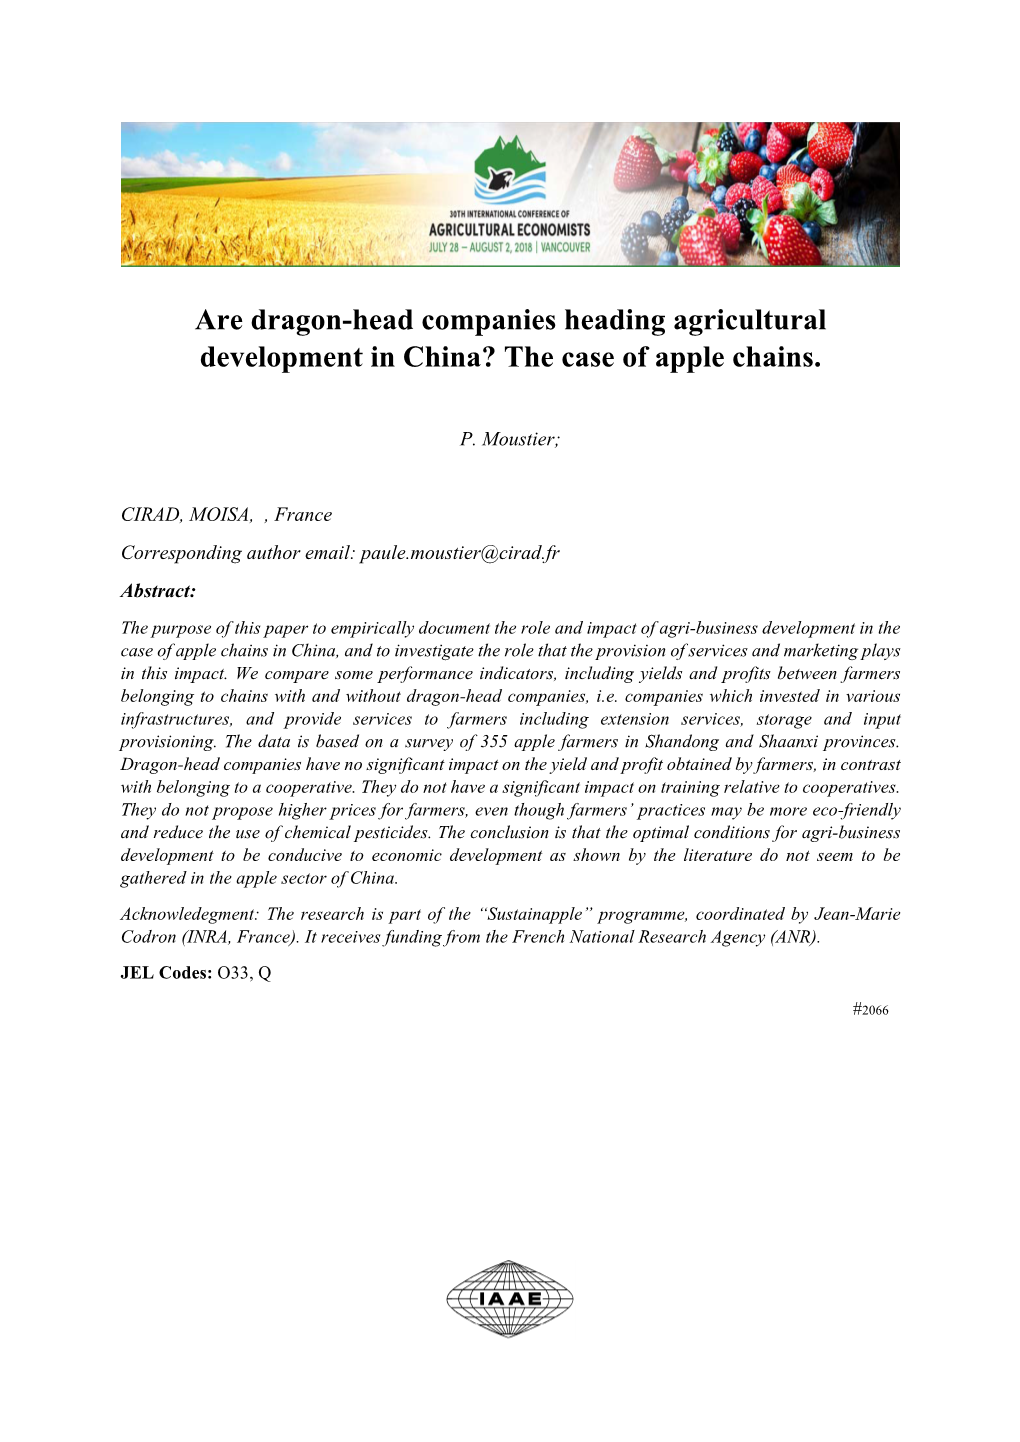 Are Dragon-Head Companies Heading Agricultural Development in China? the Case of Apple Chains